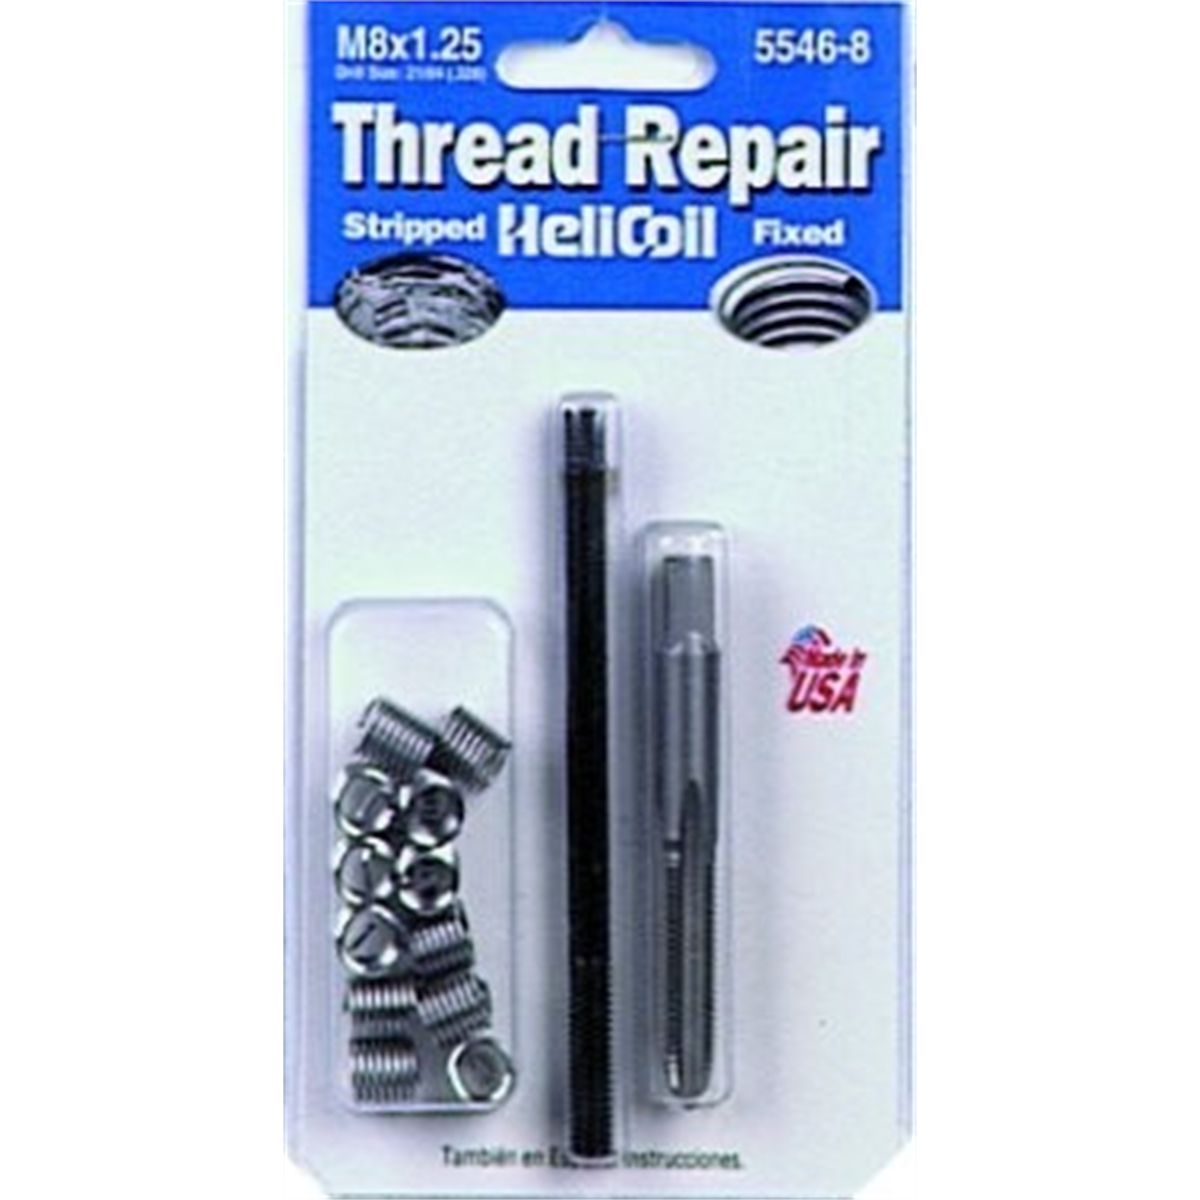 Helicoil Thread Repair M6 x 1 Drill and Tap 12 Inserts